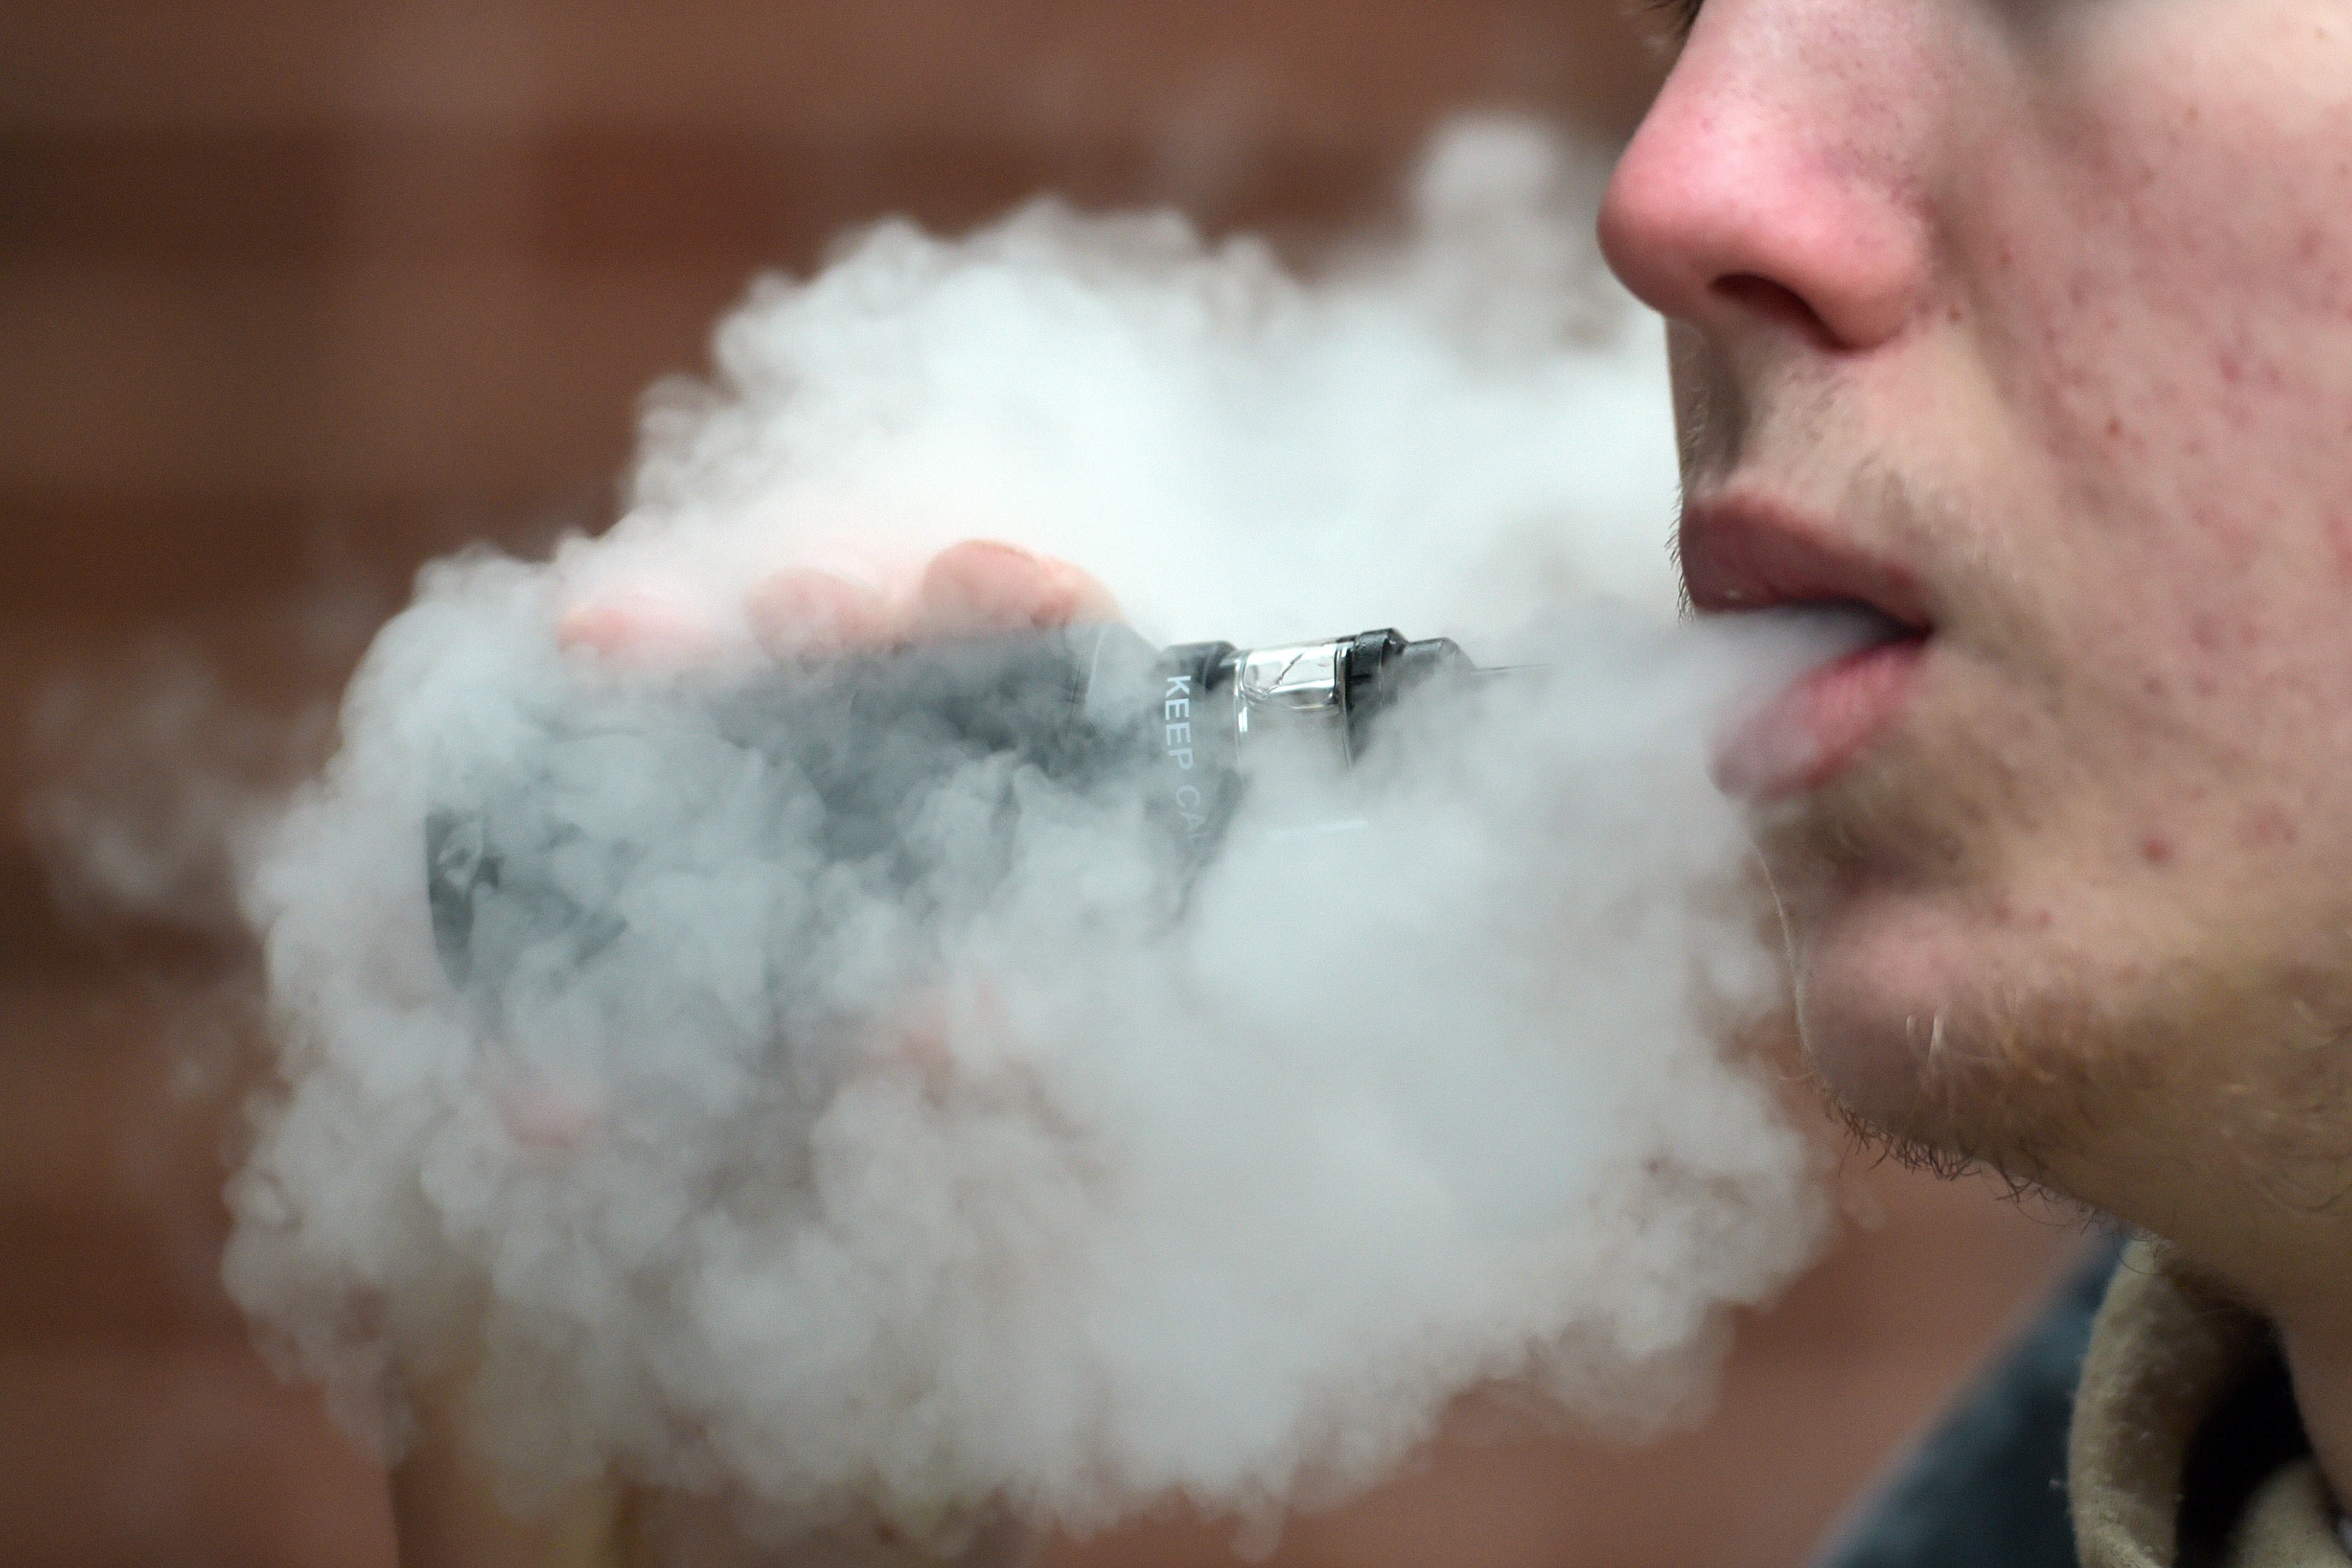 Vaping in aircraft cabins or toilets among most common example of mid-air rule breaking